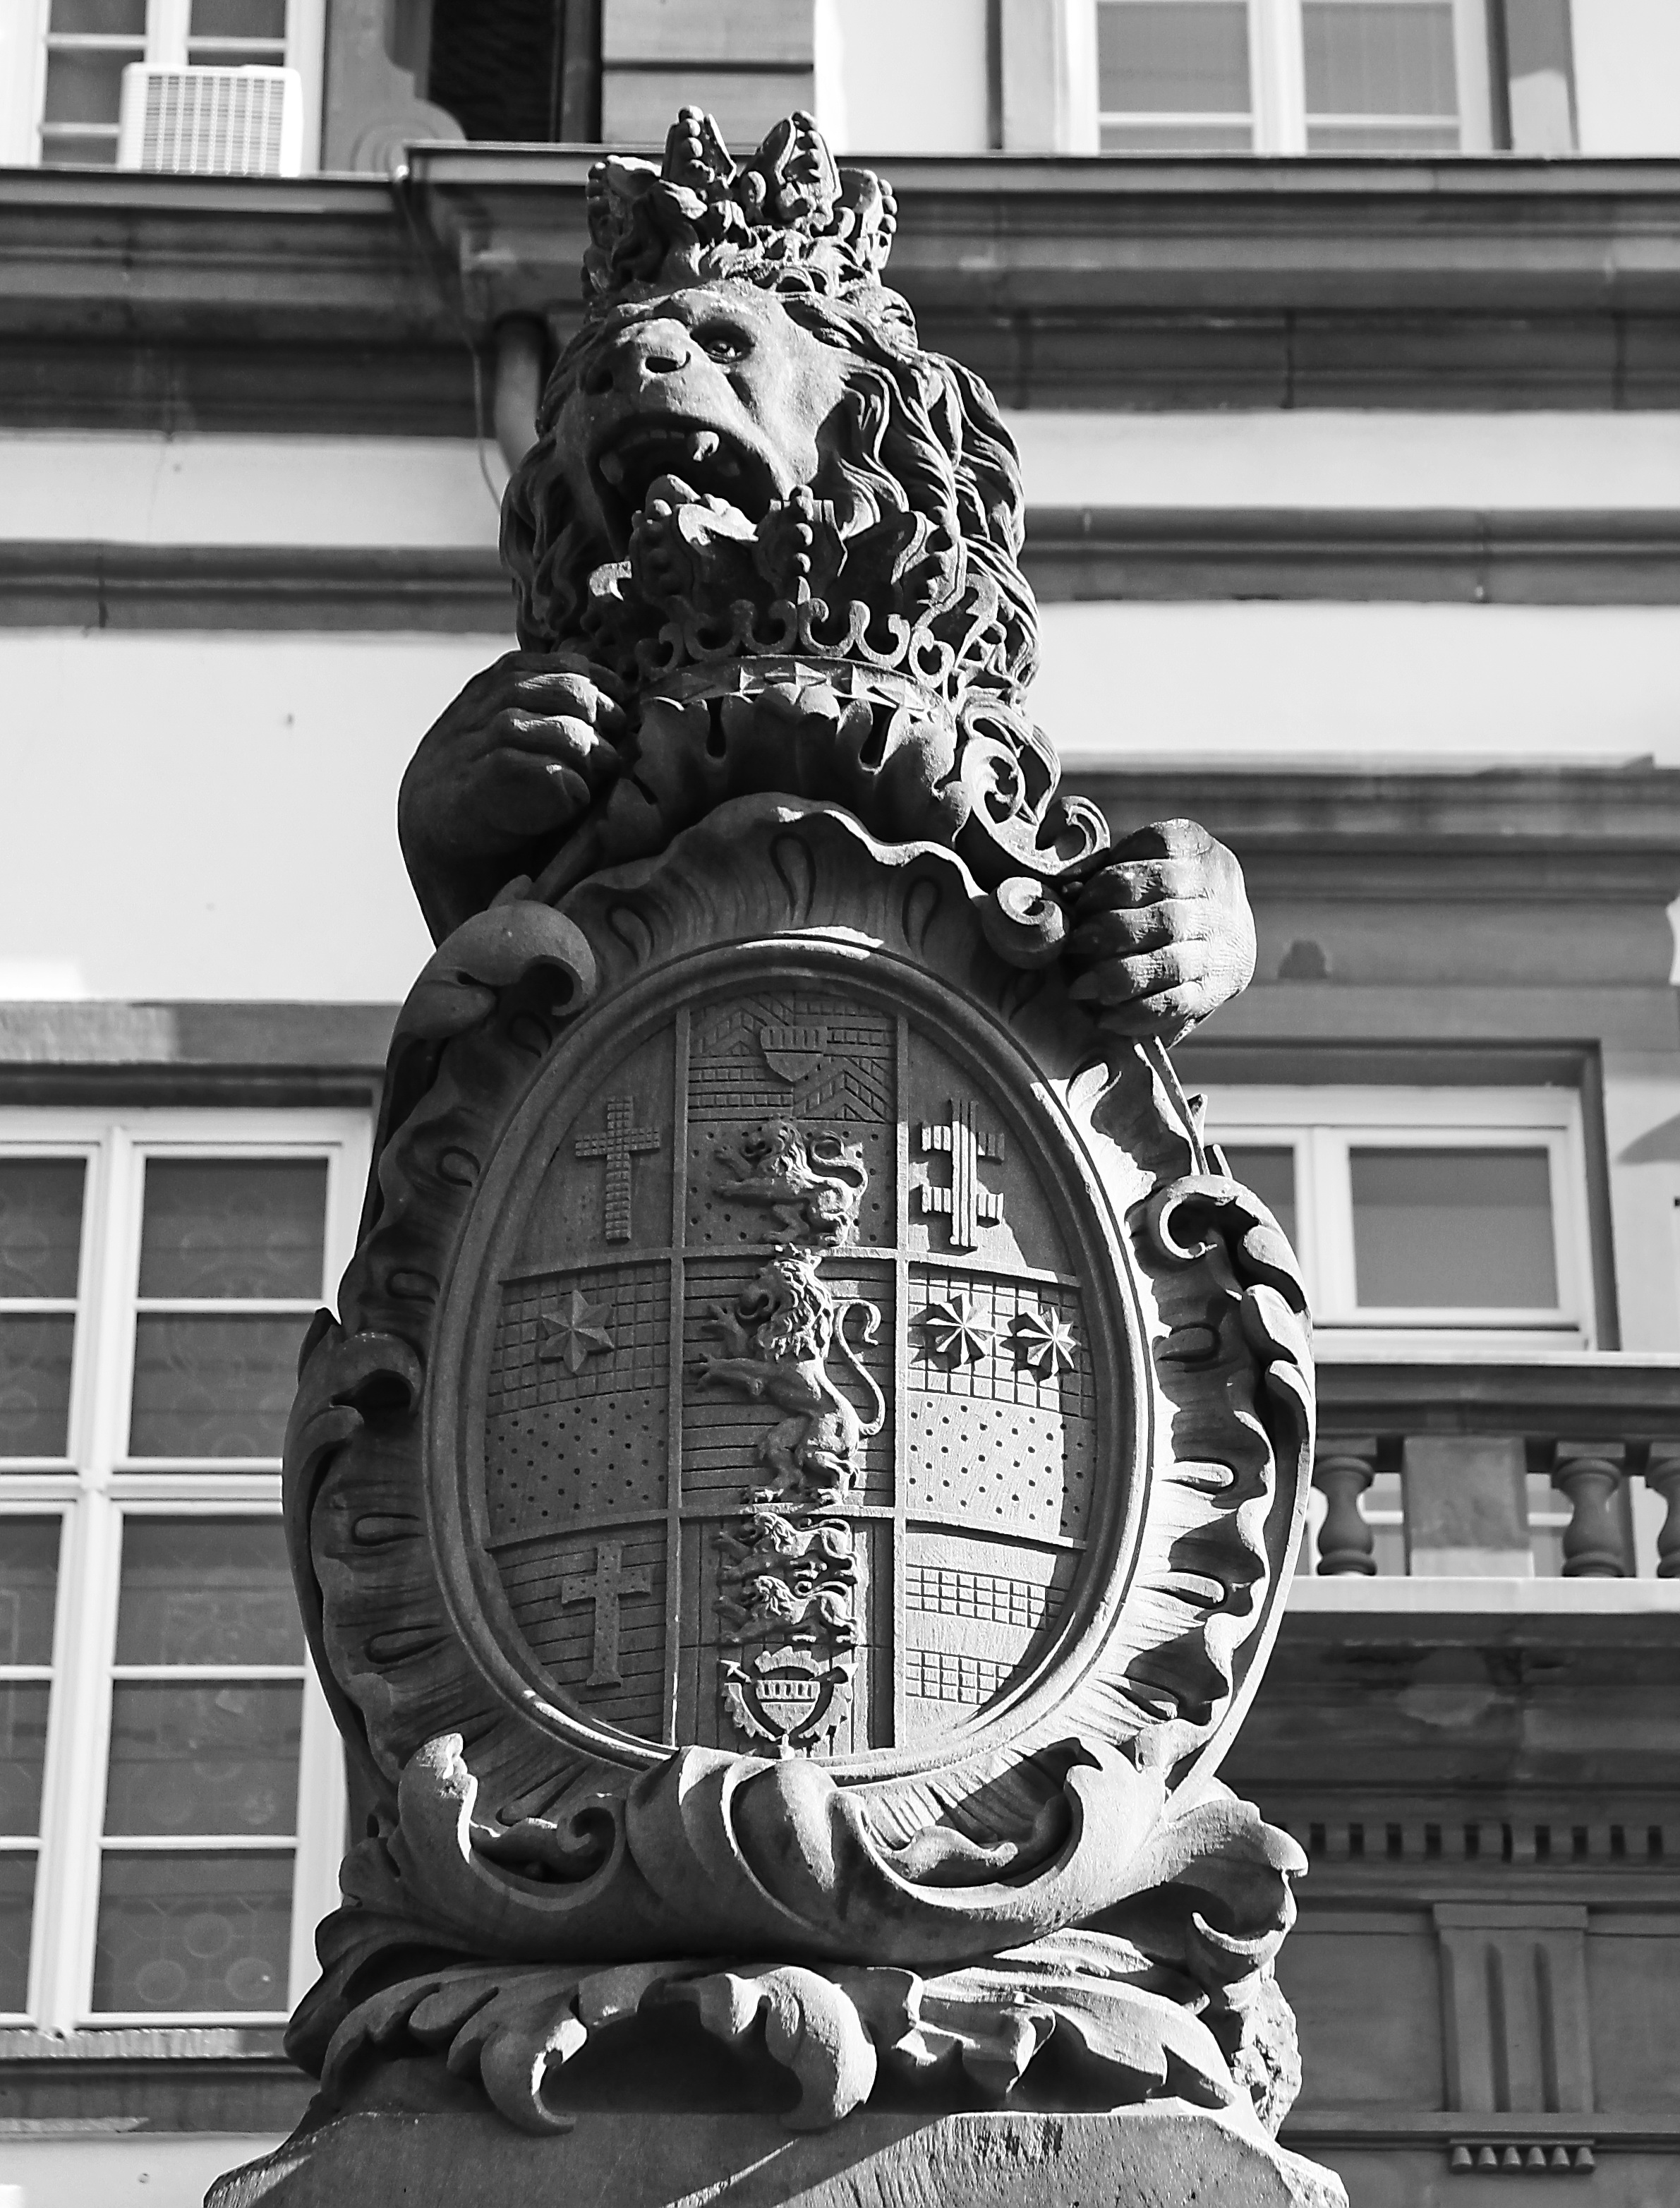 Heraldic shield hold by the lion